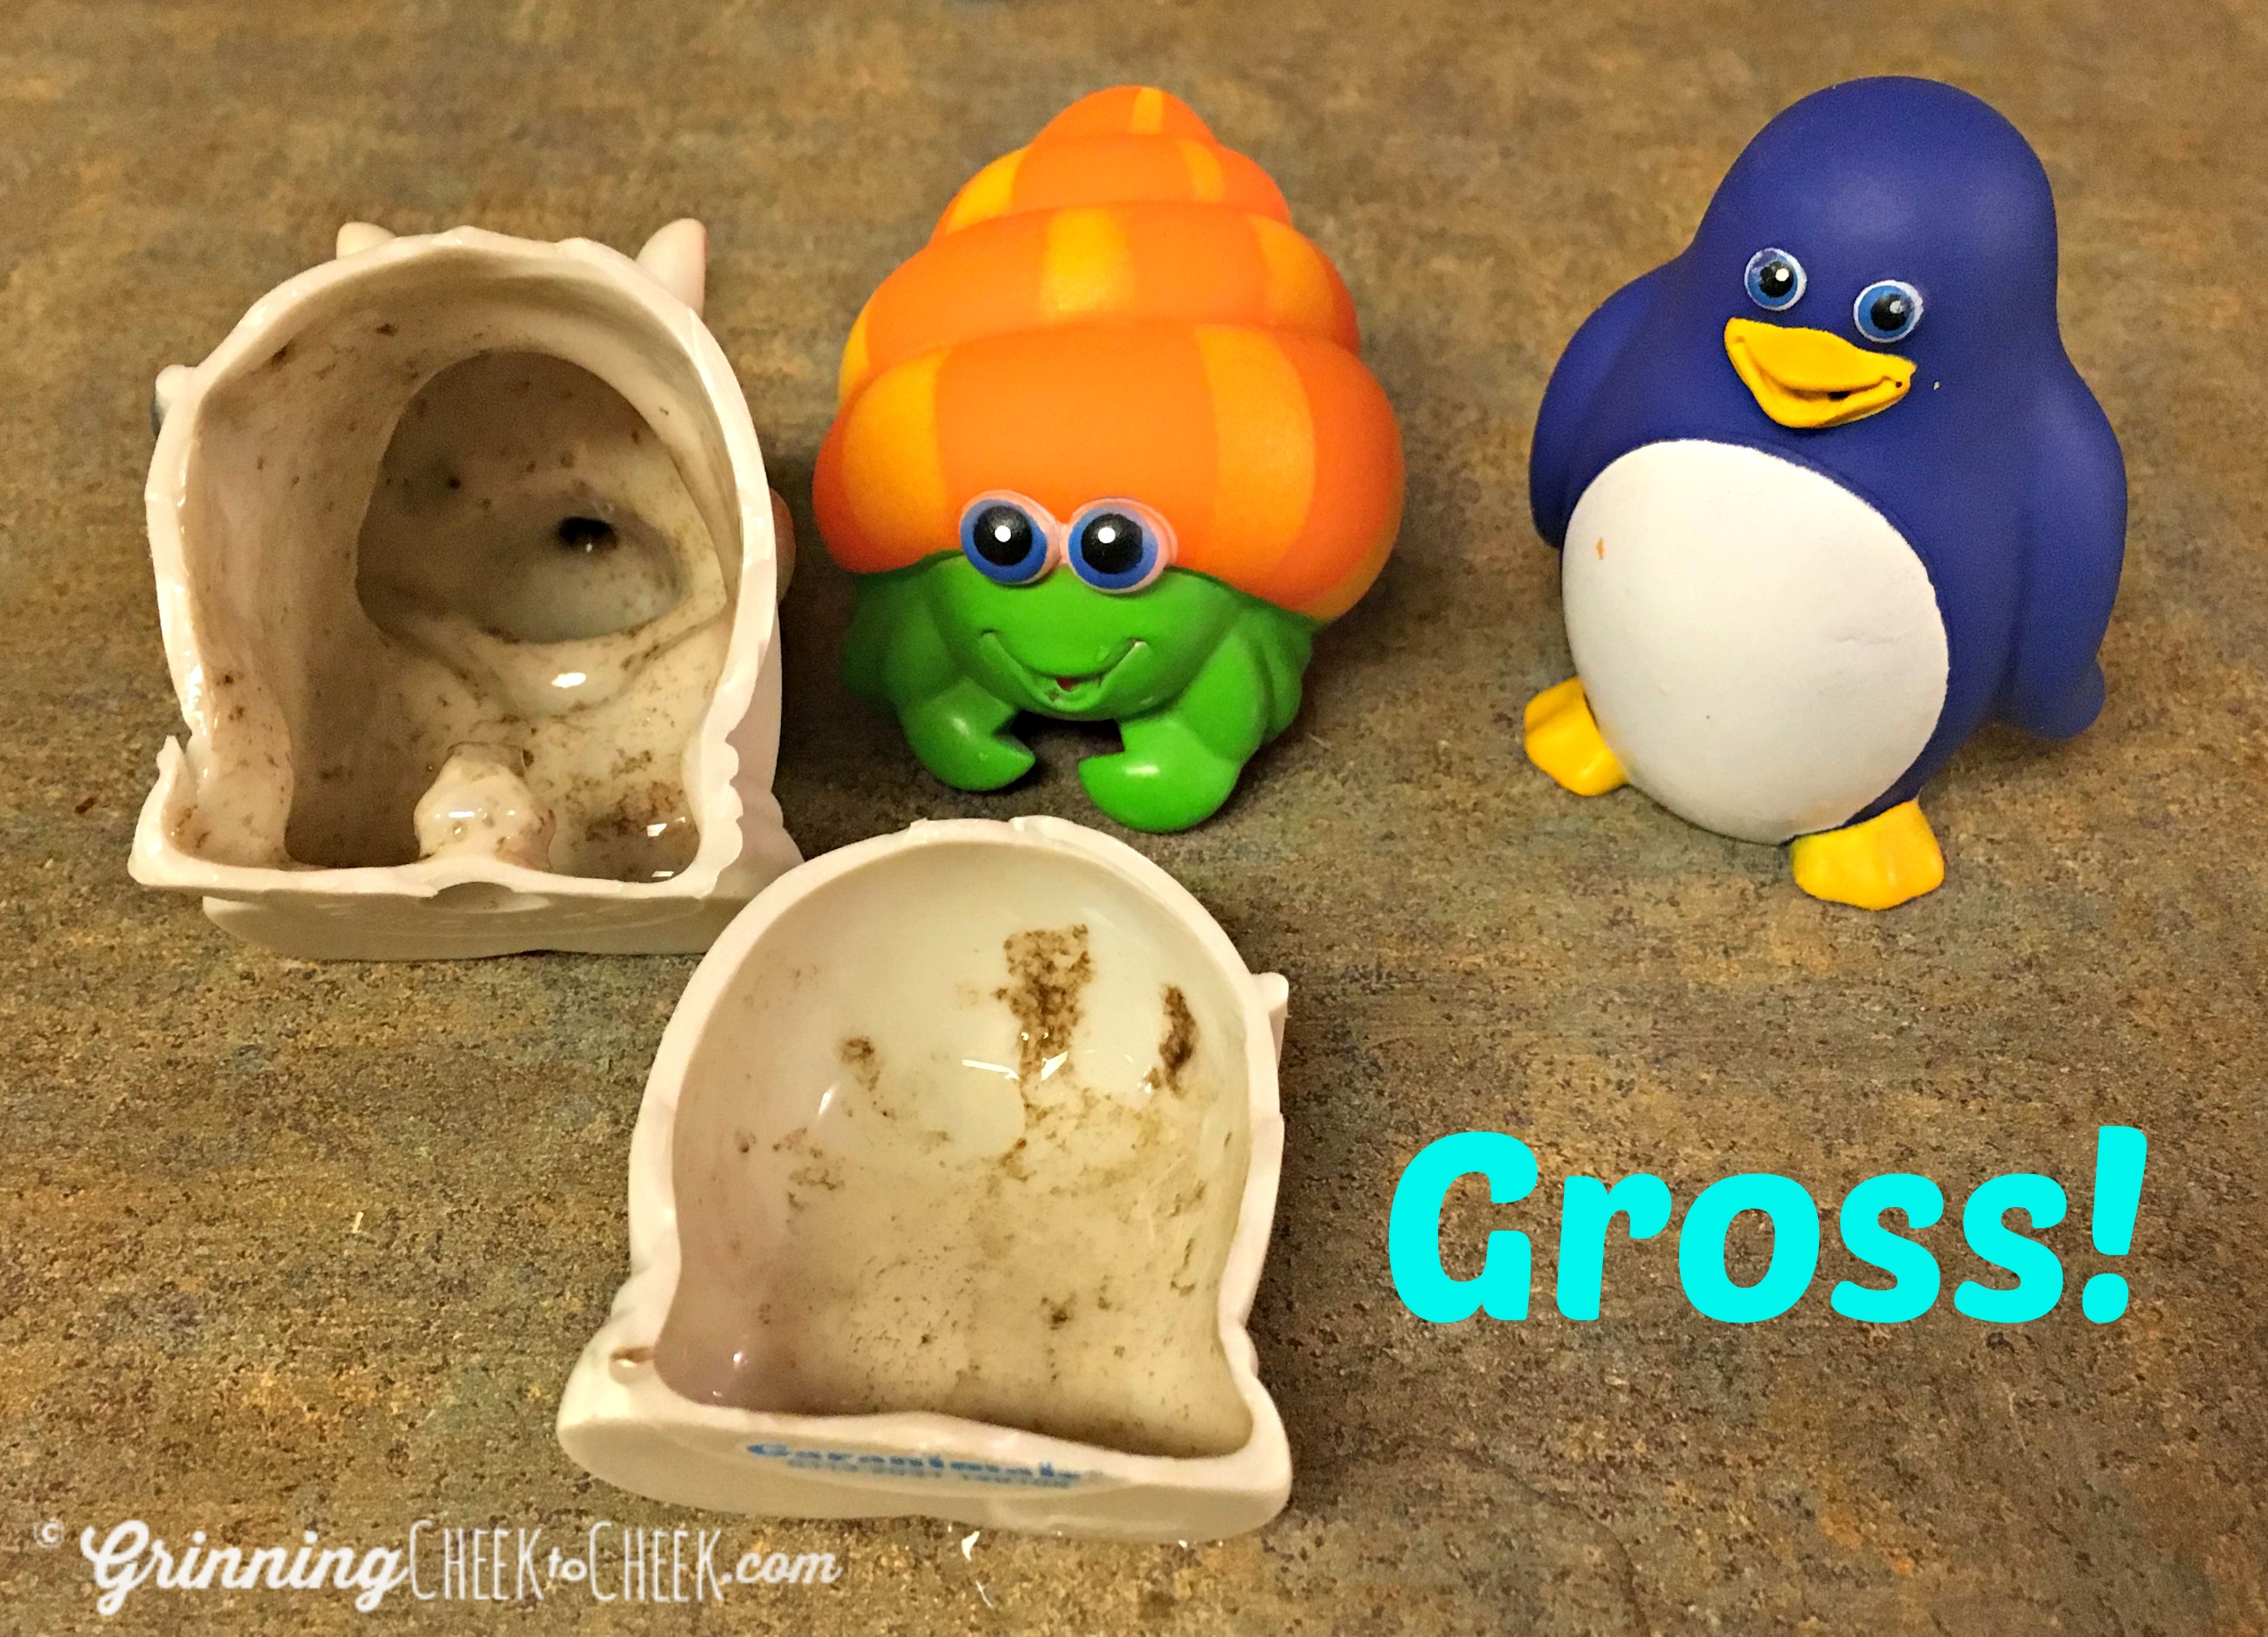 Moldy Bath Toys: How Bad Are They? - PureWow